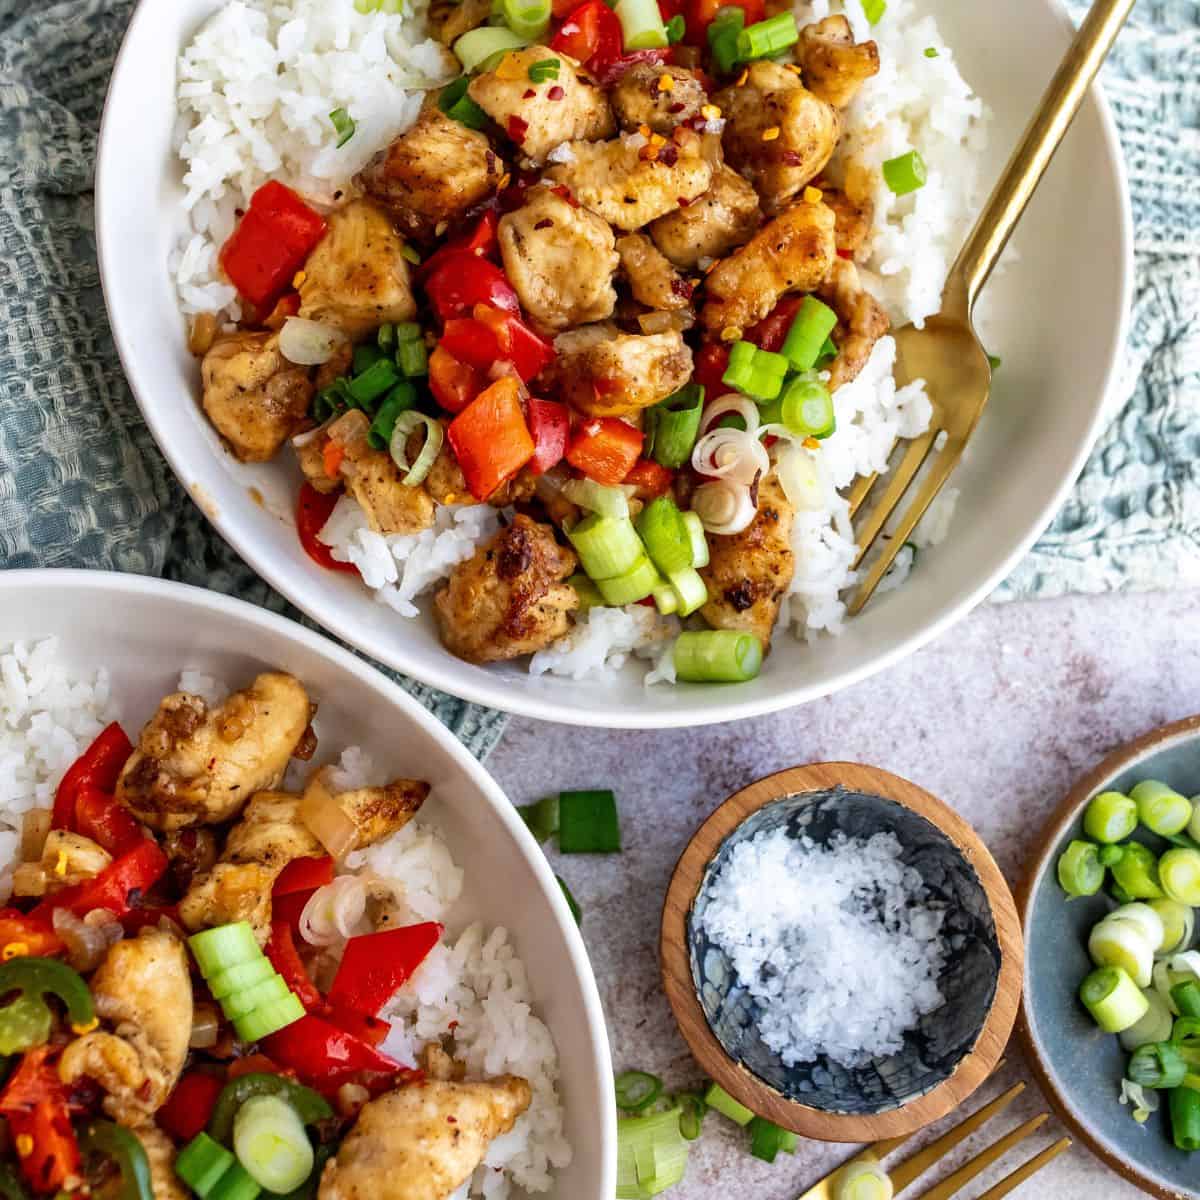 Crispy Chicken with salt and pepper seasonings served over rice with veggies.